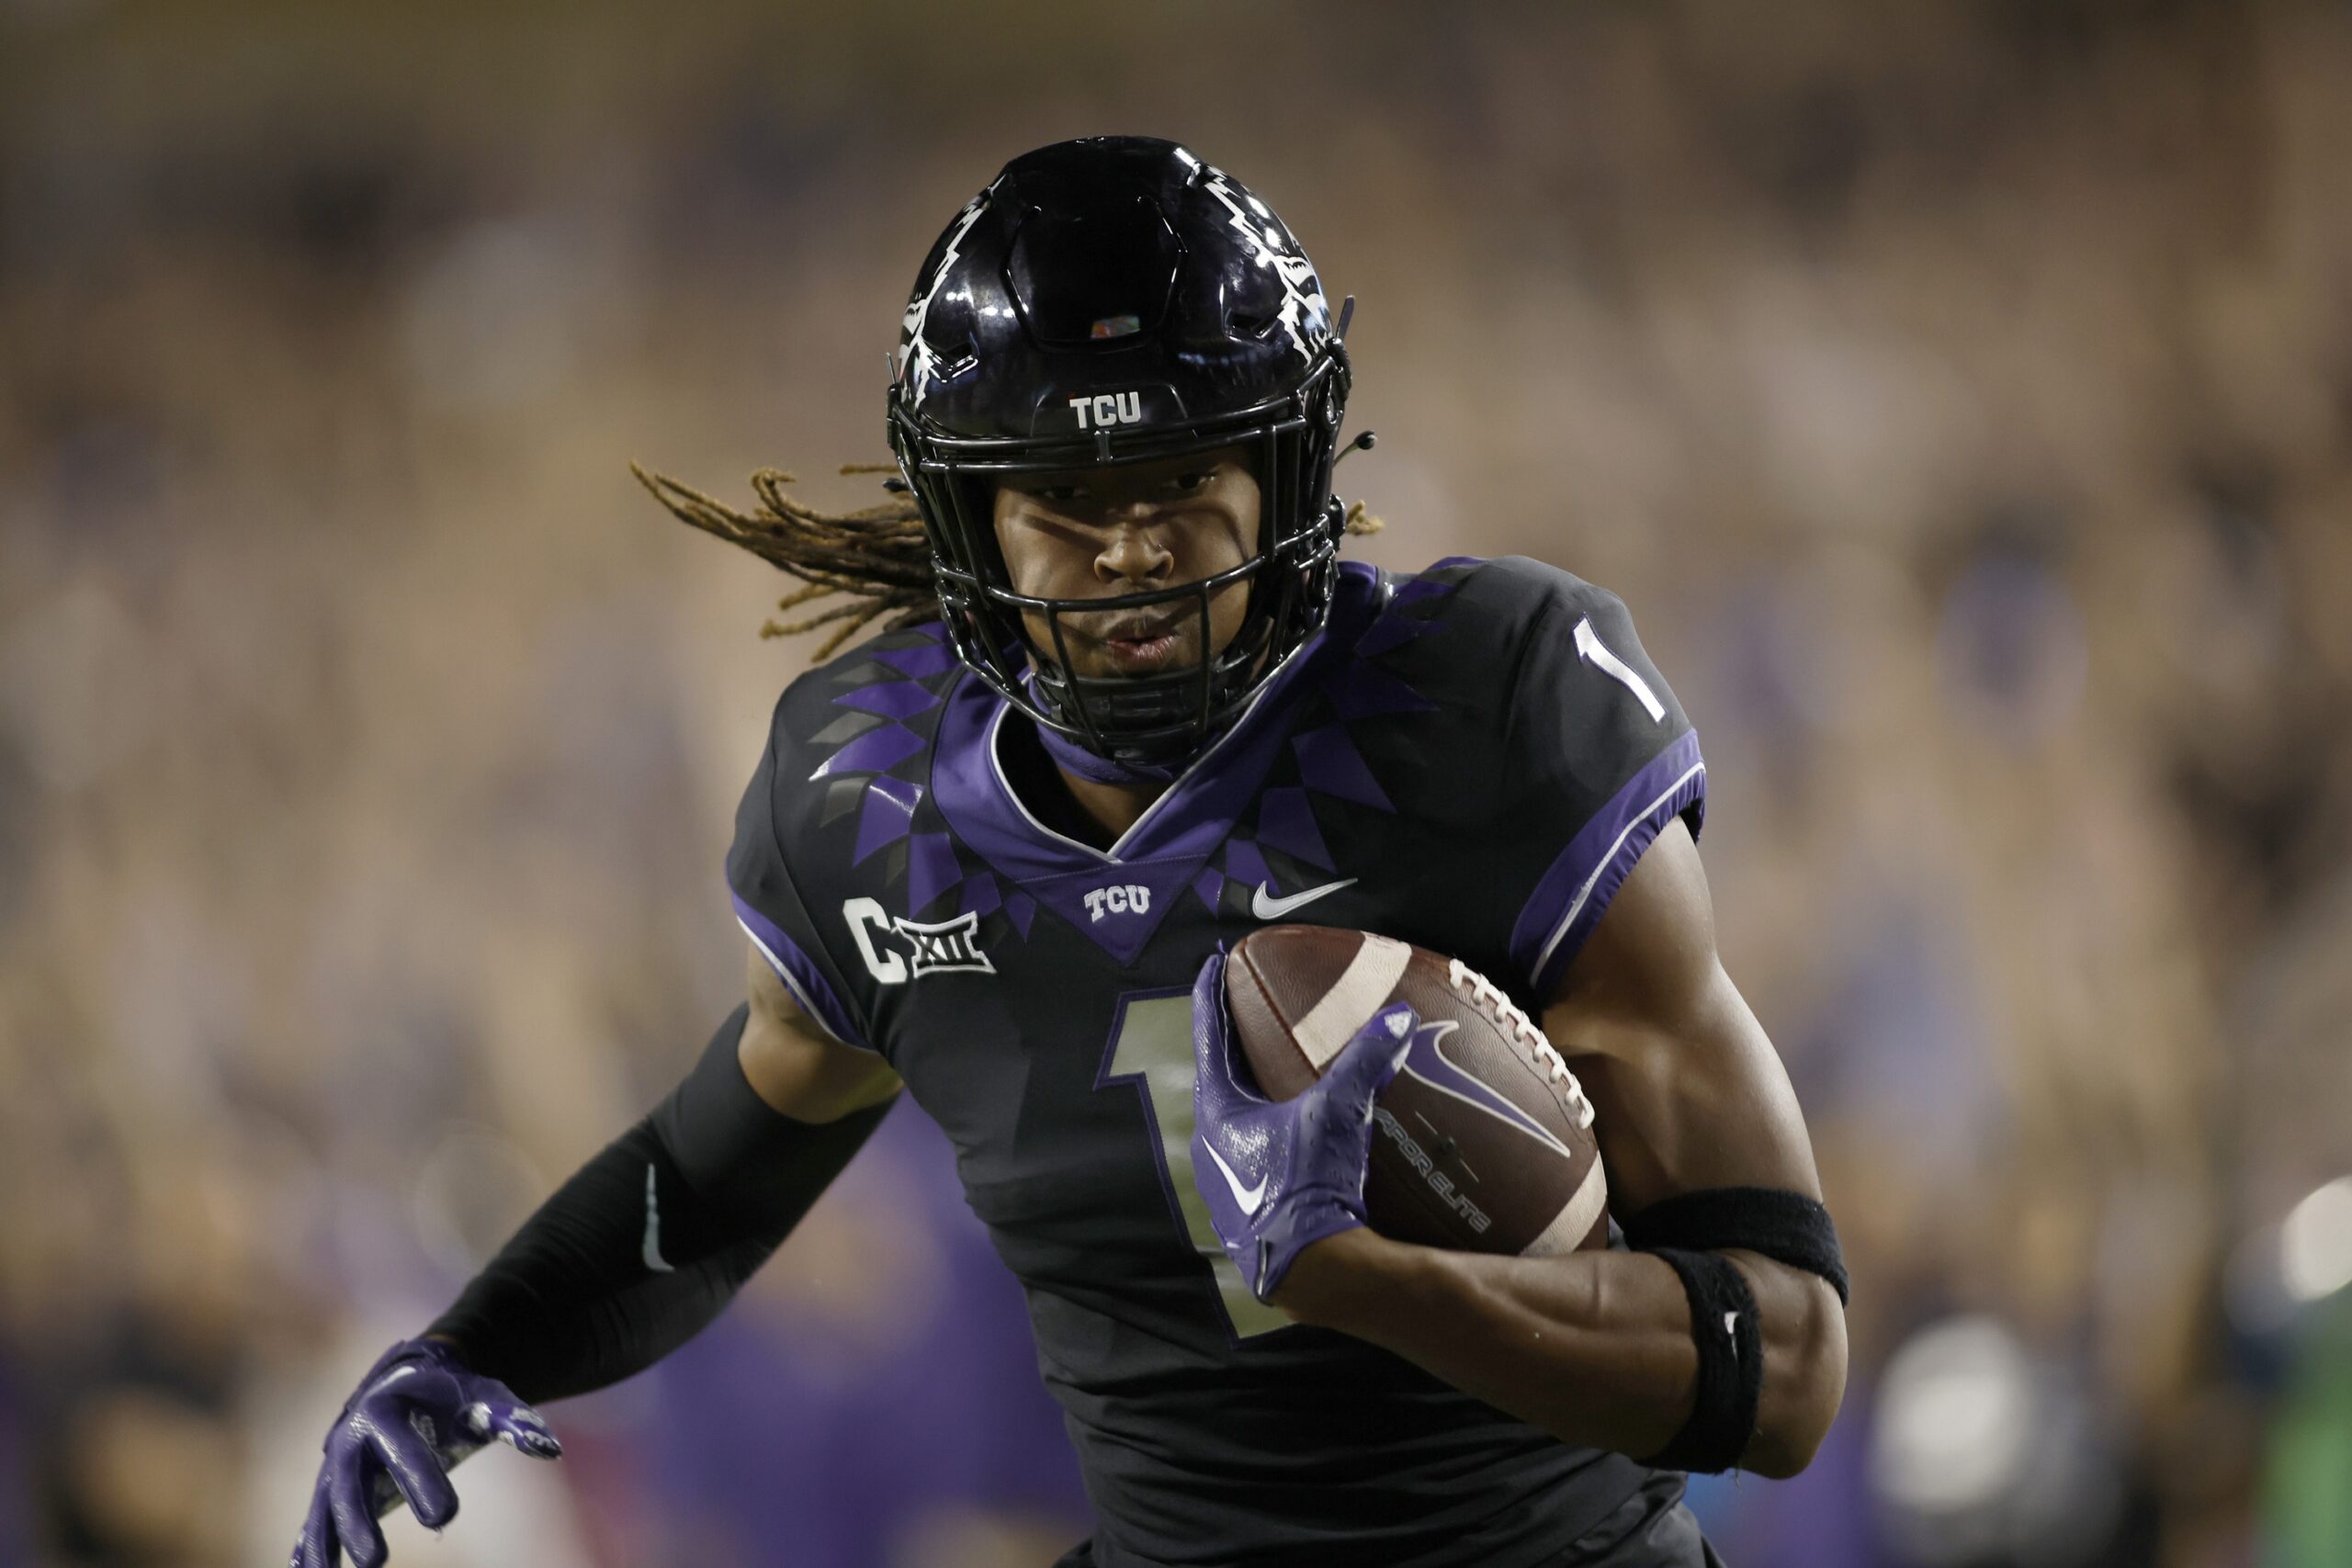 2022 Big 12 Championship Game Top NFL Draft Prospects to Watch Include Quentin Johnston, Felix Anudike-Uzomah